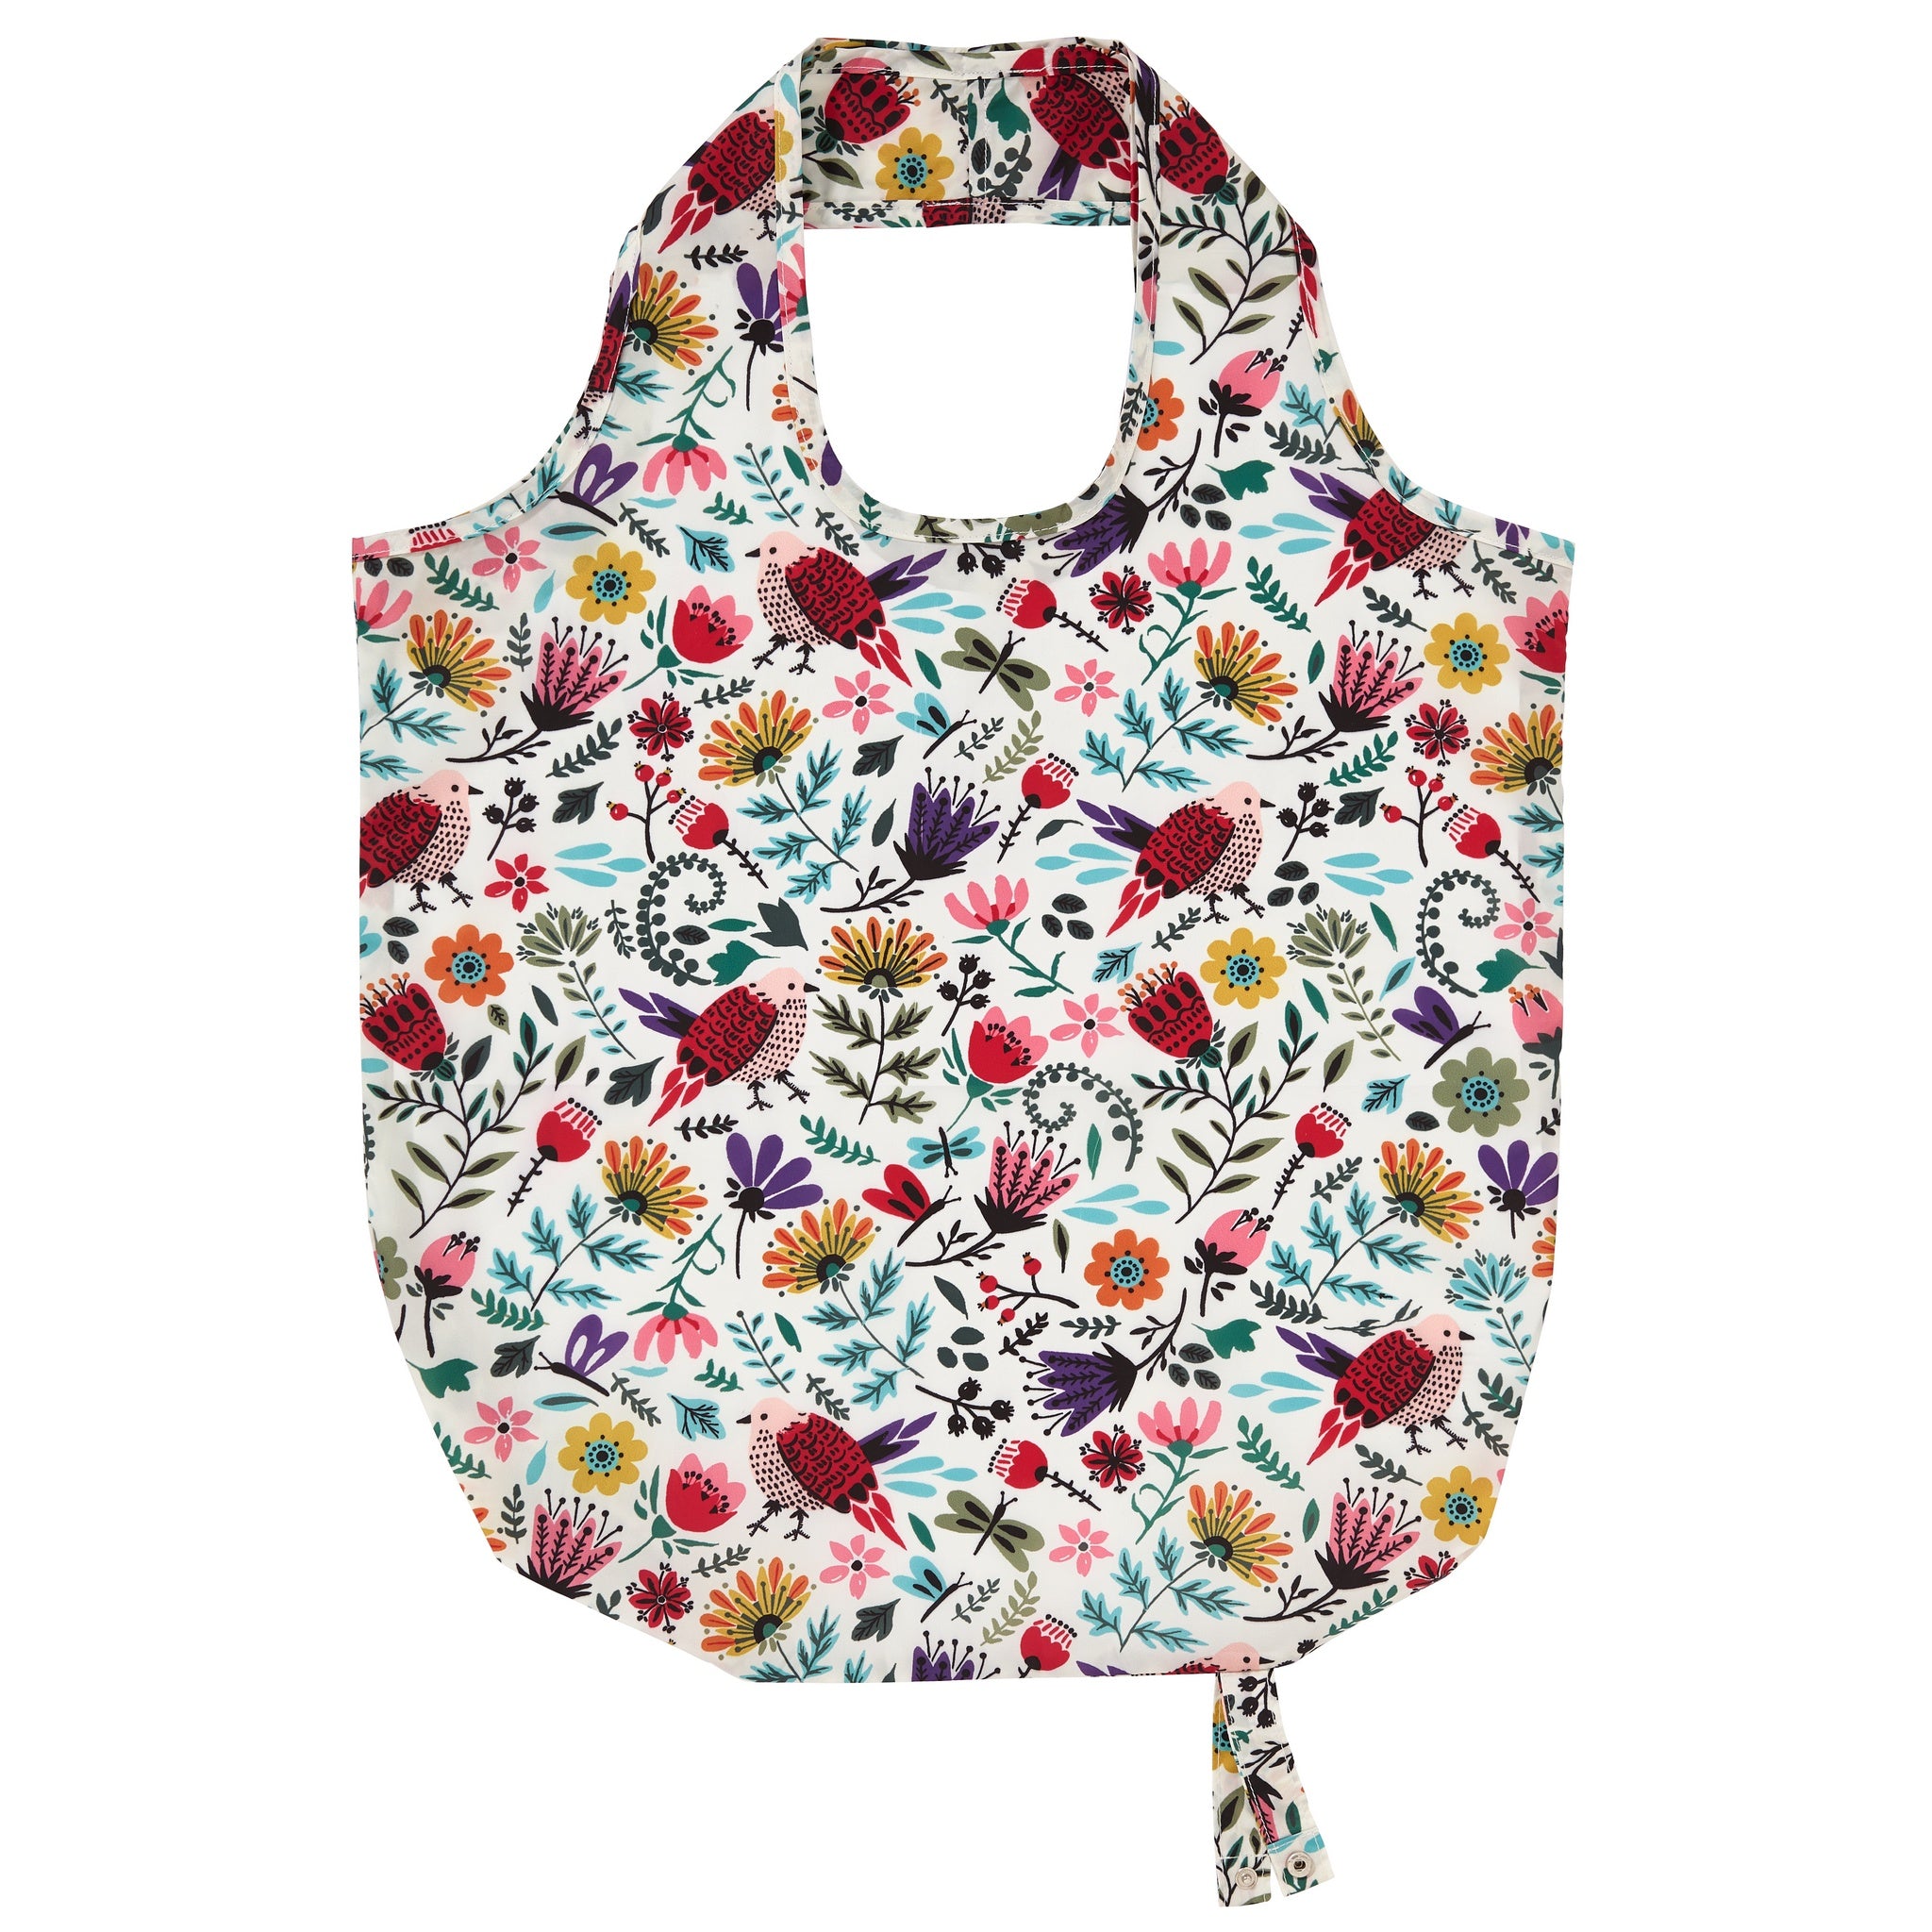 Ulster Weavers Melody Packable Bag - One Size in Multicolour - Bag - Ulster Weavers